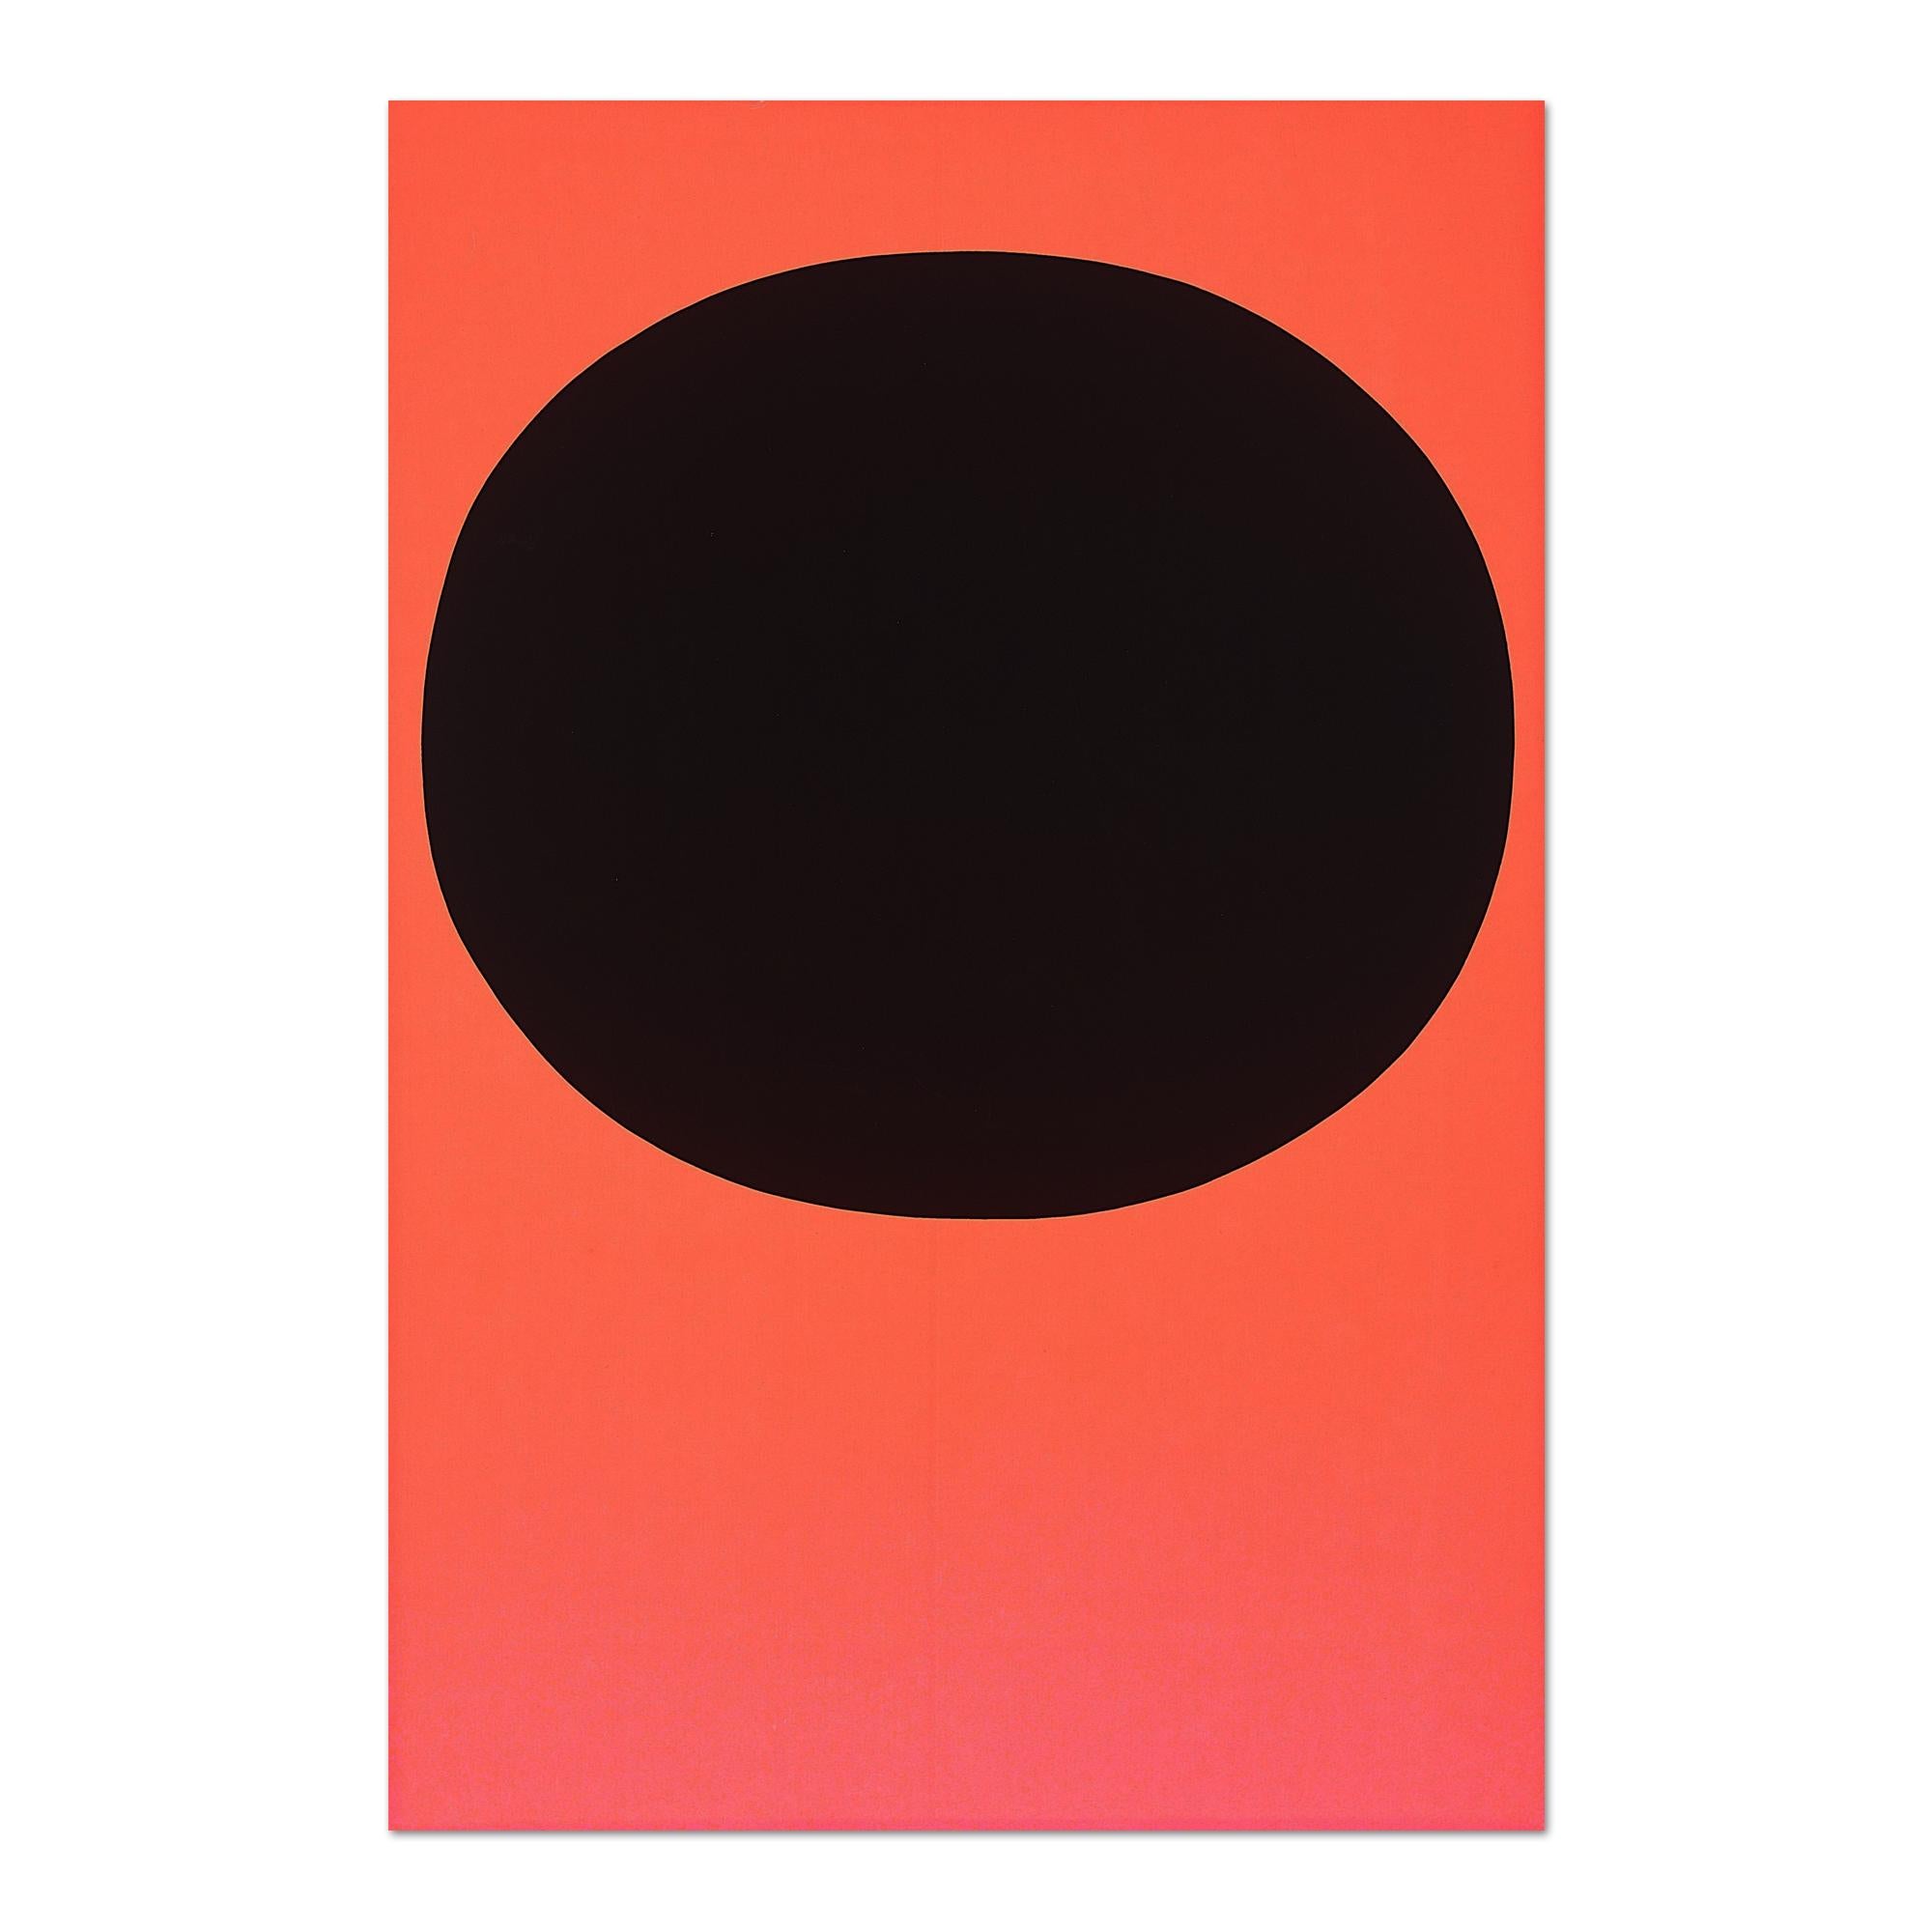 Black on Orange Red (from Modulation), Abstract Art, Minimalism, 20th Century - Print by Rupprecht Geiger